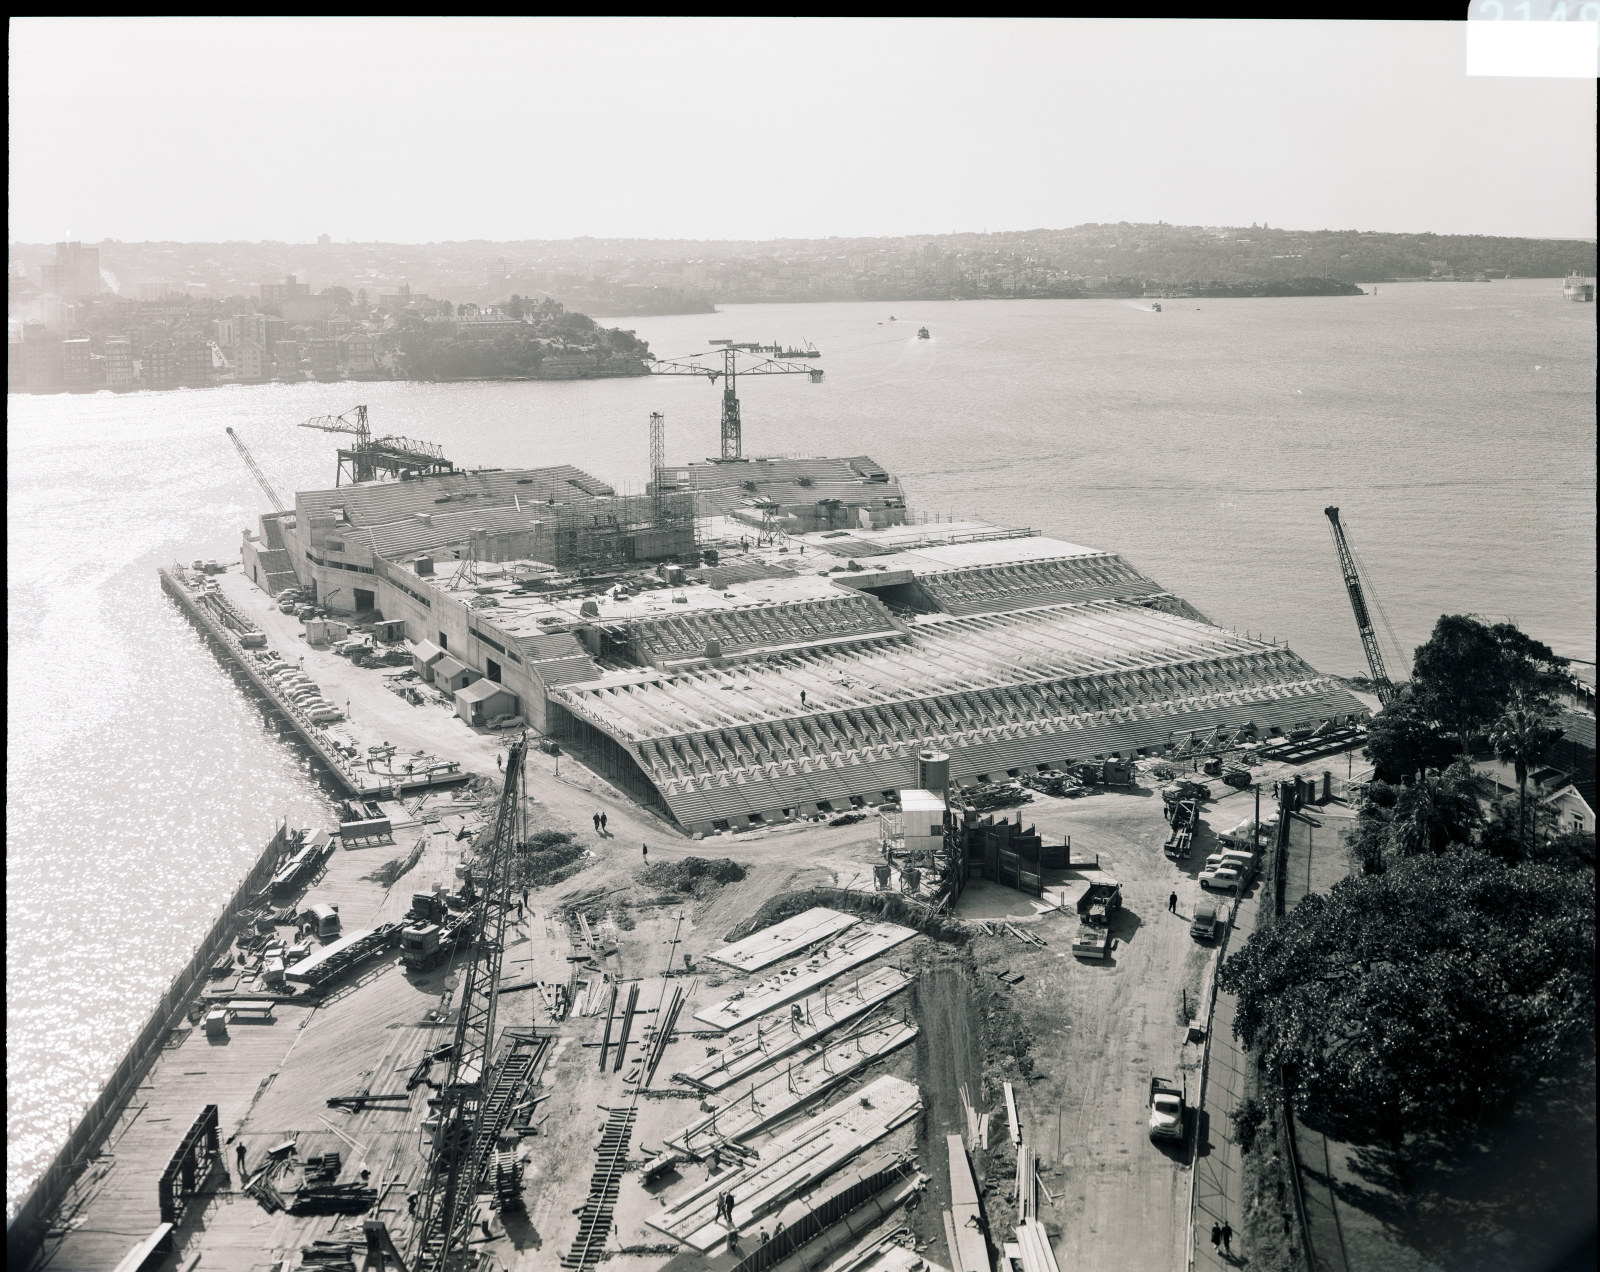 Government Printing Office 2 - 21486 - Sydney Opera House, progress shot from Unilever House [Public Works; building construction; harbours] [GPO original locations or series - St62359] [28/05/1963]